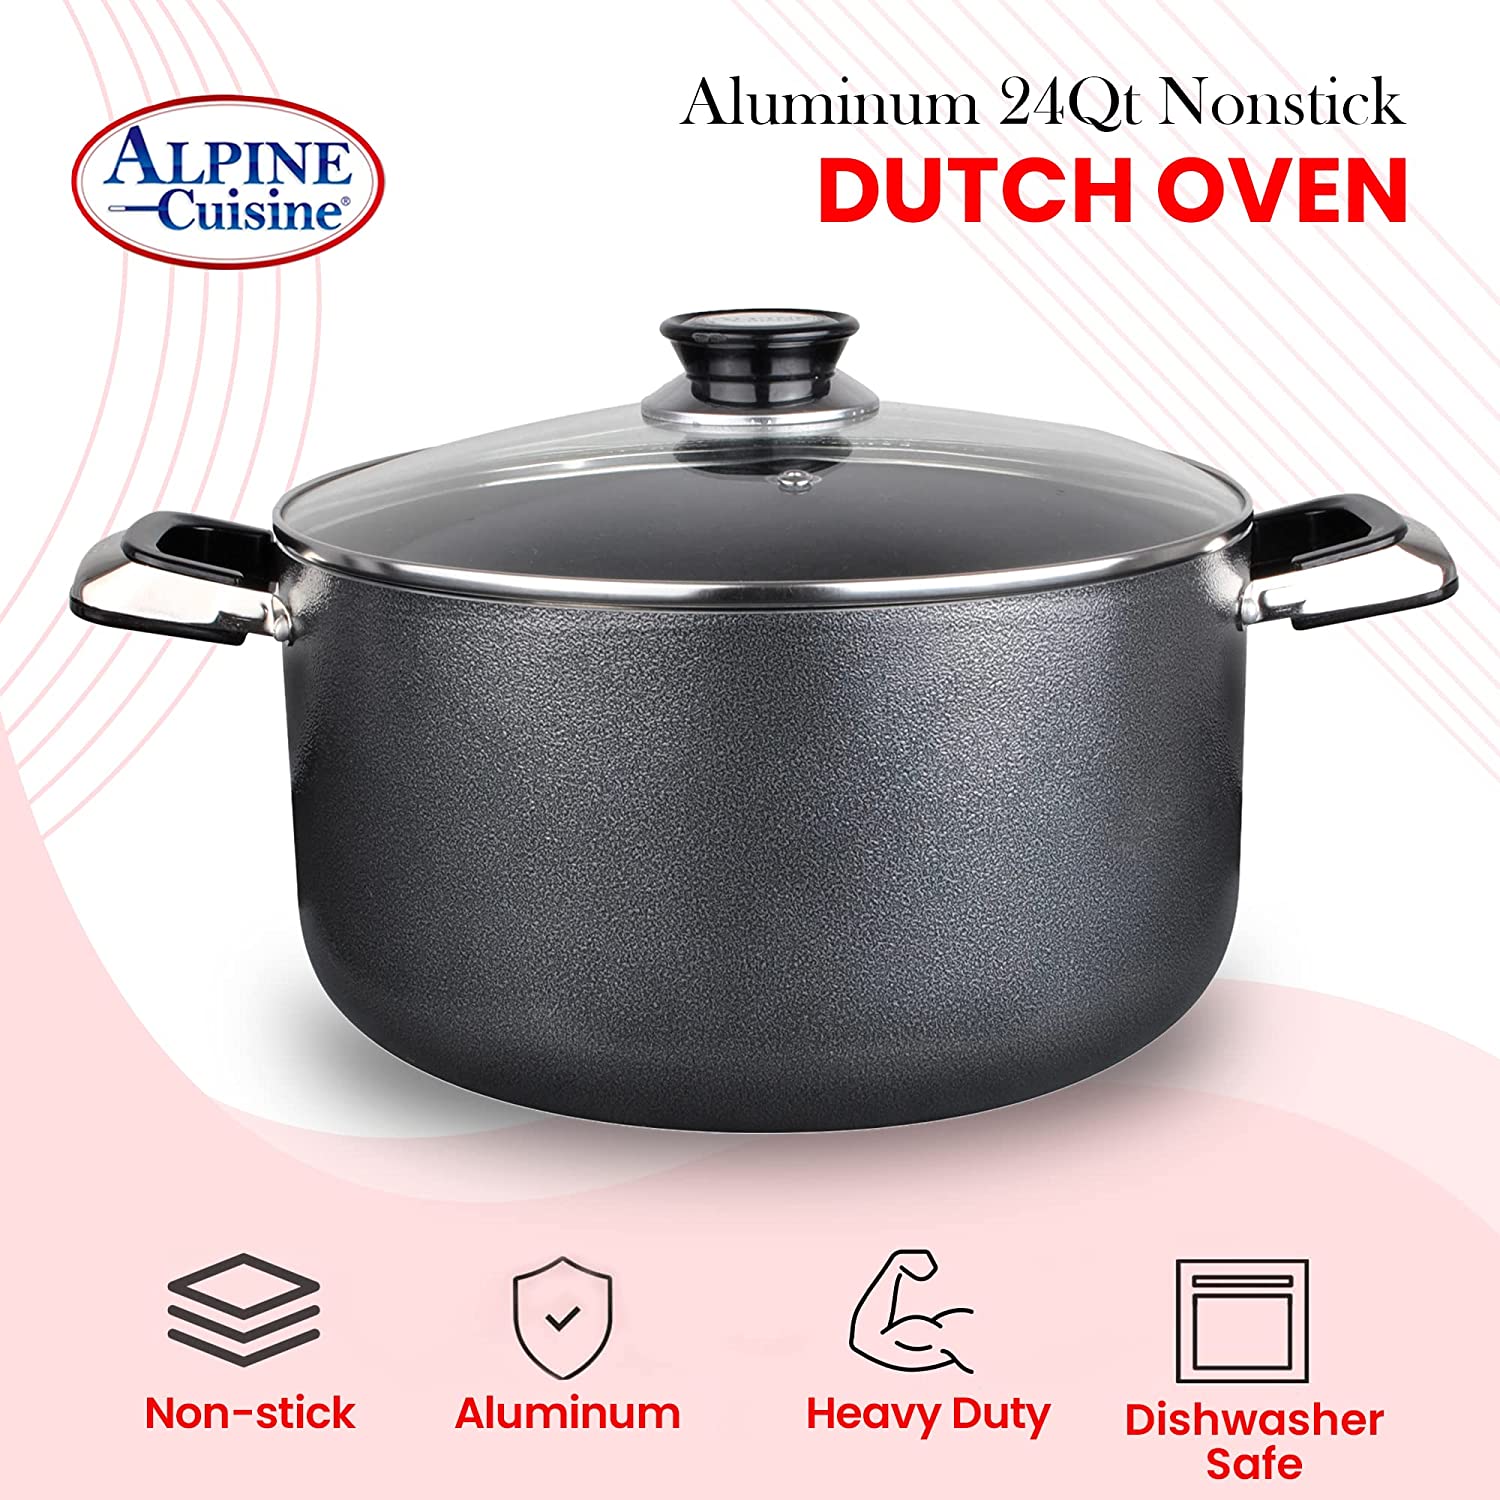 Alpine Cuisine 4 Quart Non-stick Stock Pot with Tempered Glass Lid and